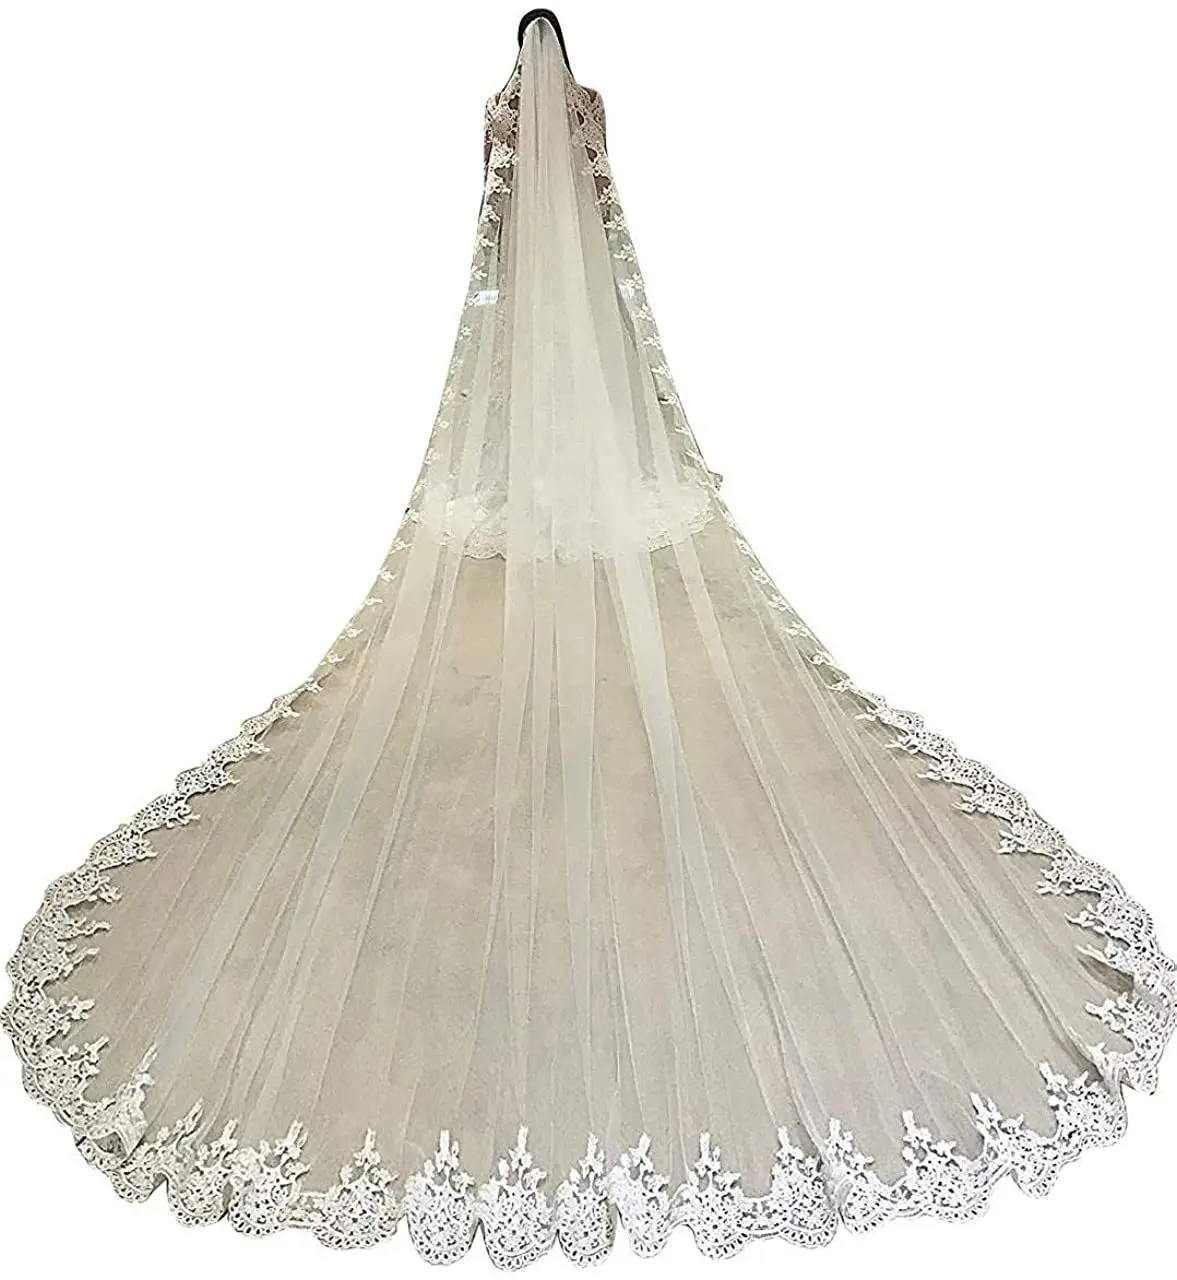 

Beauty 4 Meters Long Exquisite Lace Appliqued Cathedral Wedding veil Tulle Bridal Veils with Comb Bride Accessories